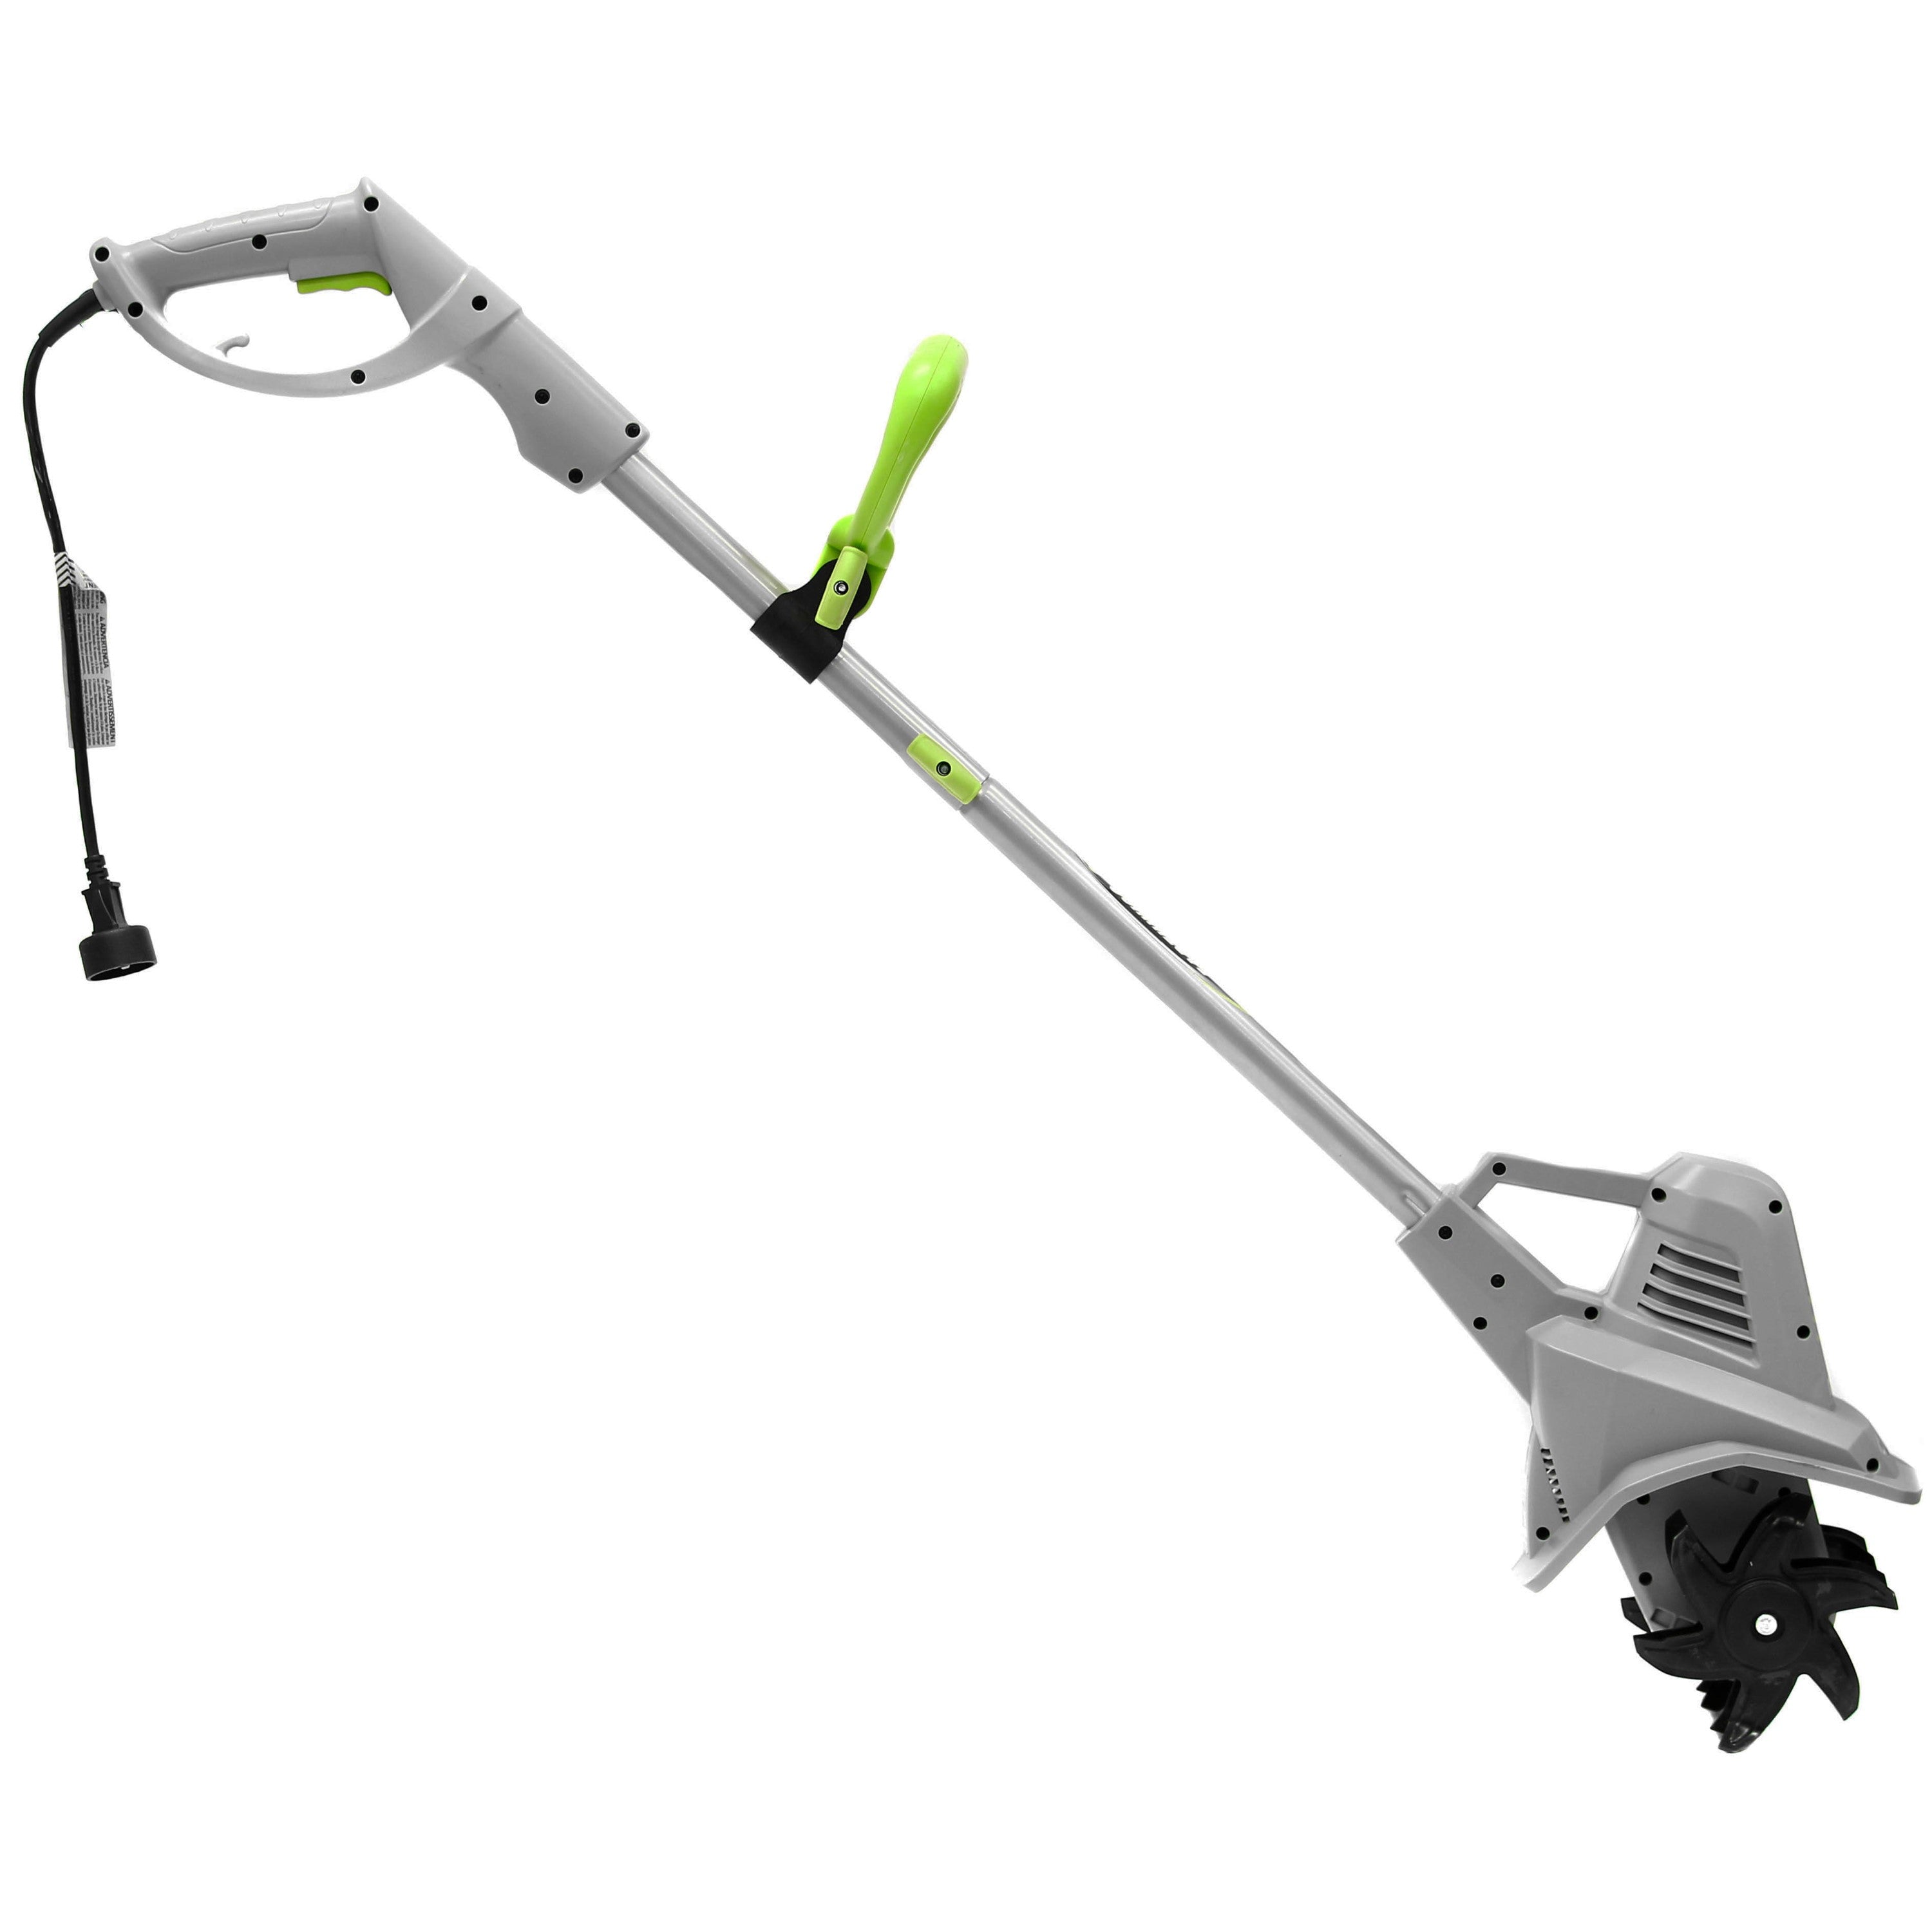 Earthwise Power Tools by ALM 7.5" 2.5-Amp 120V Corded Tiller/Cultivator